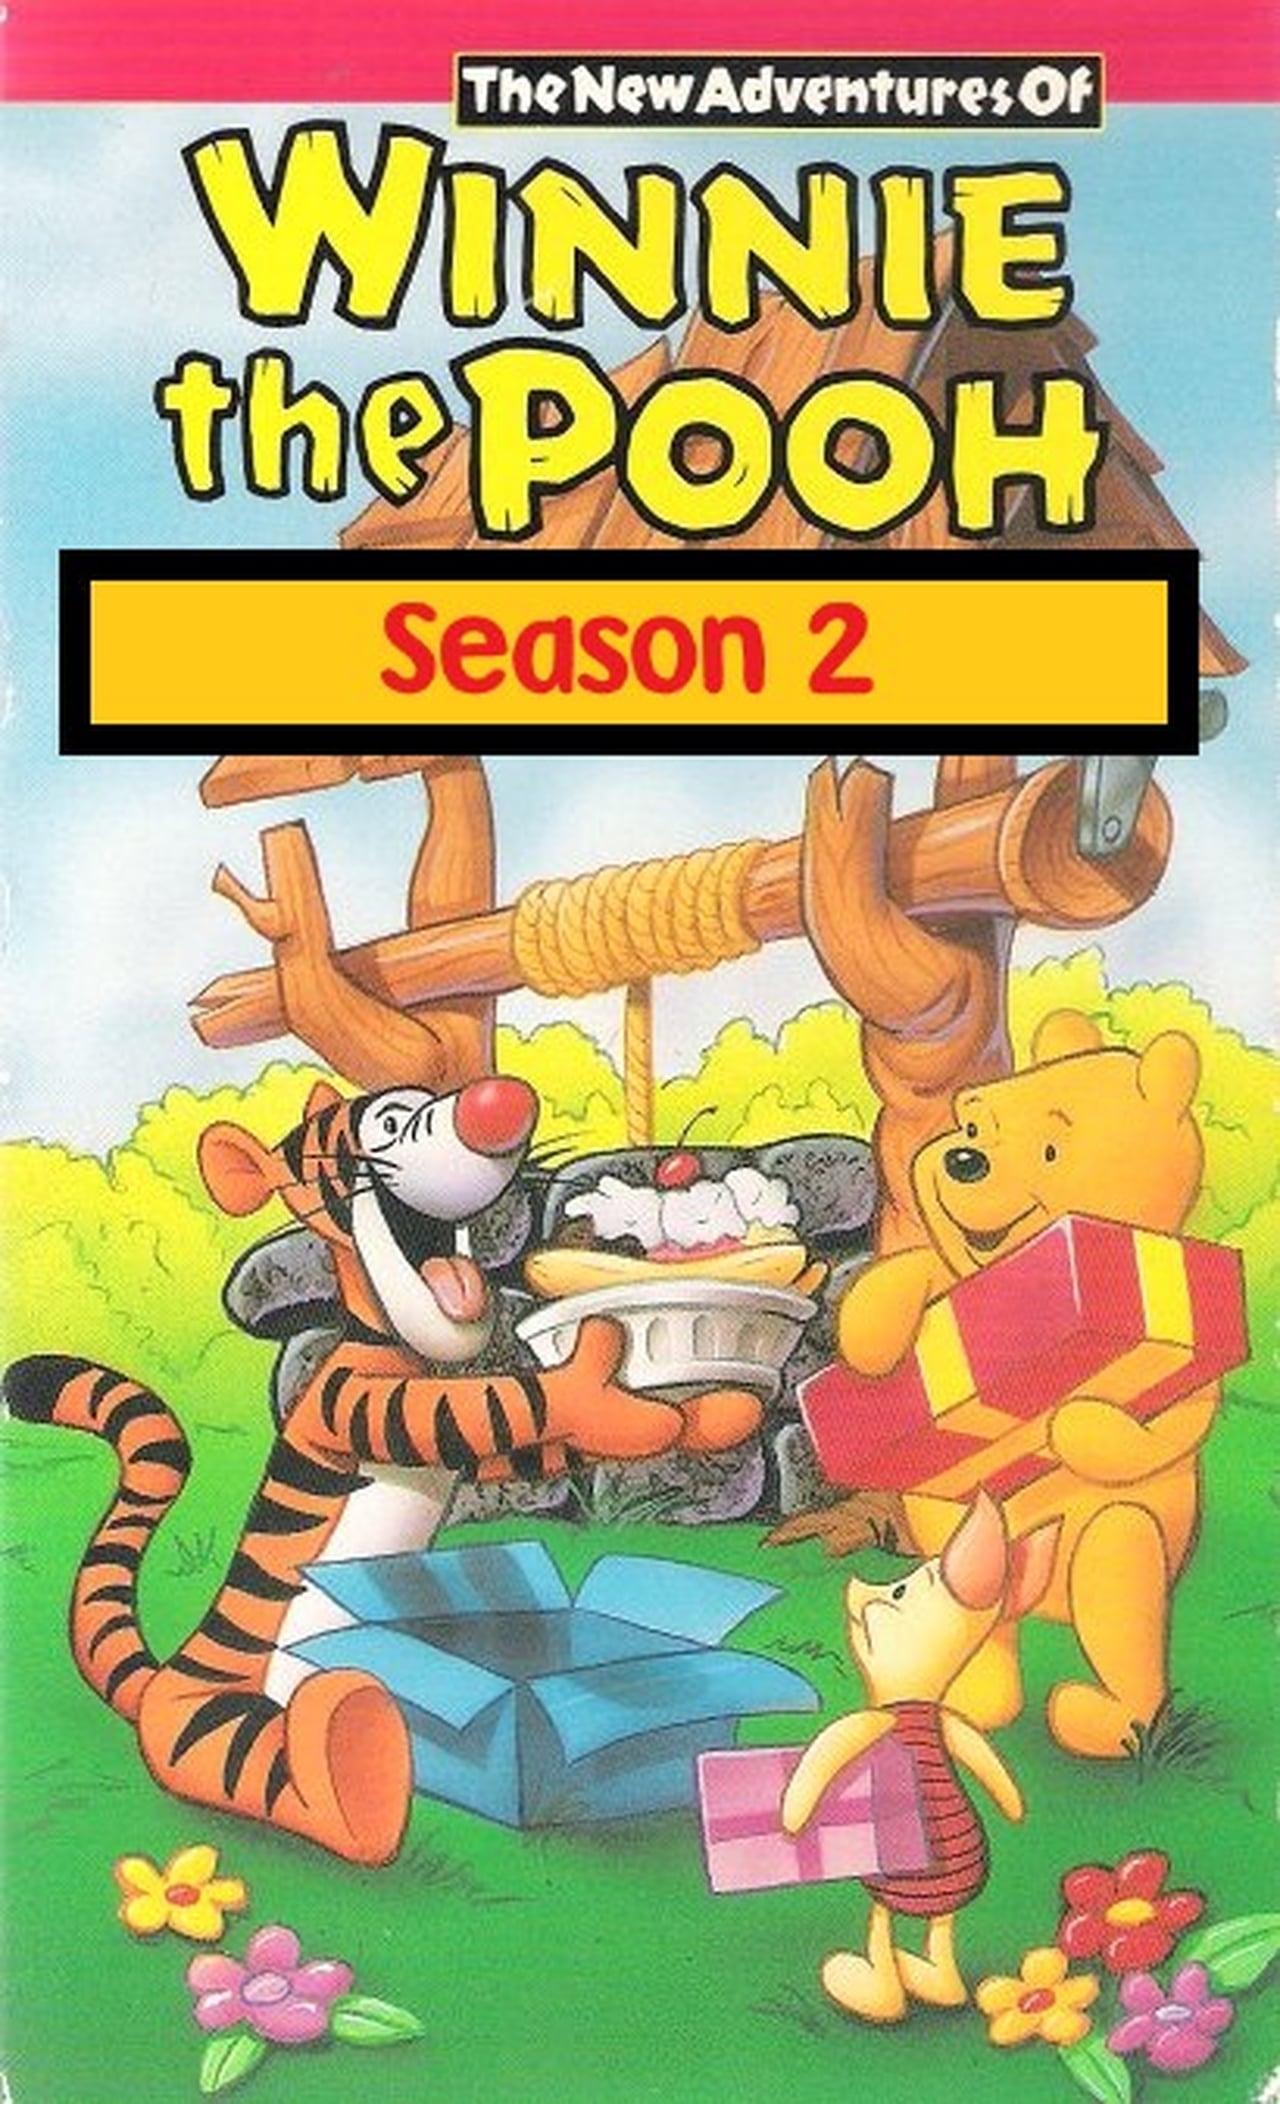 The New Adventures Of Winnie The Pooh (1989)